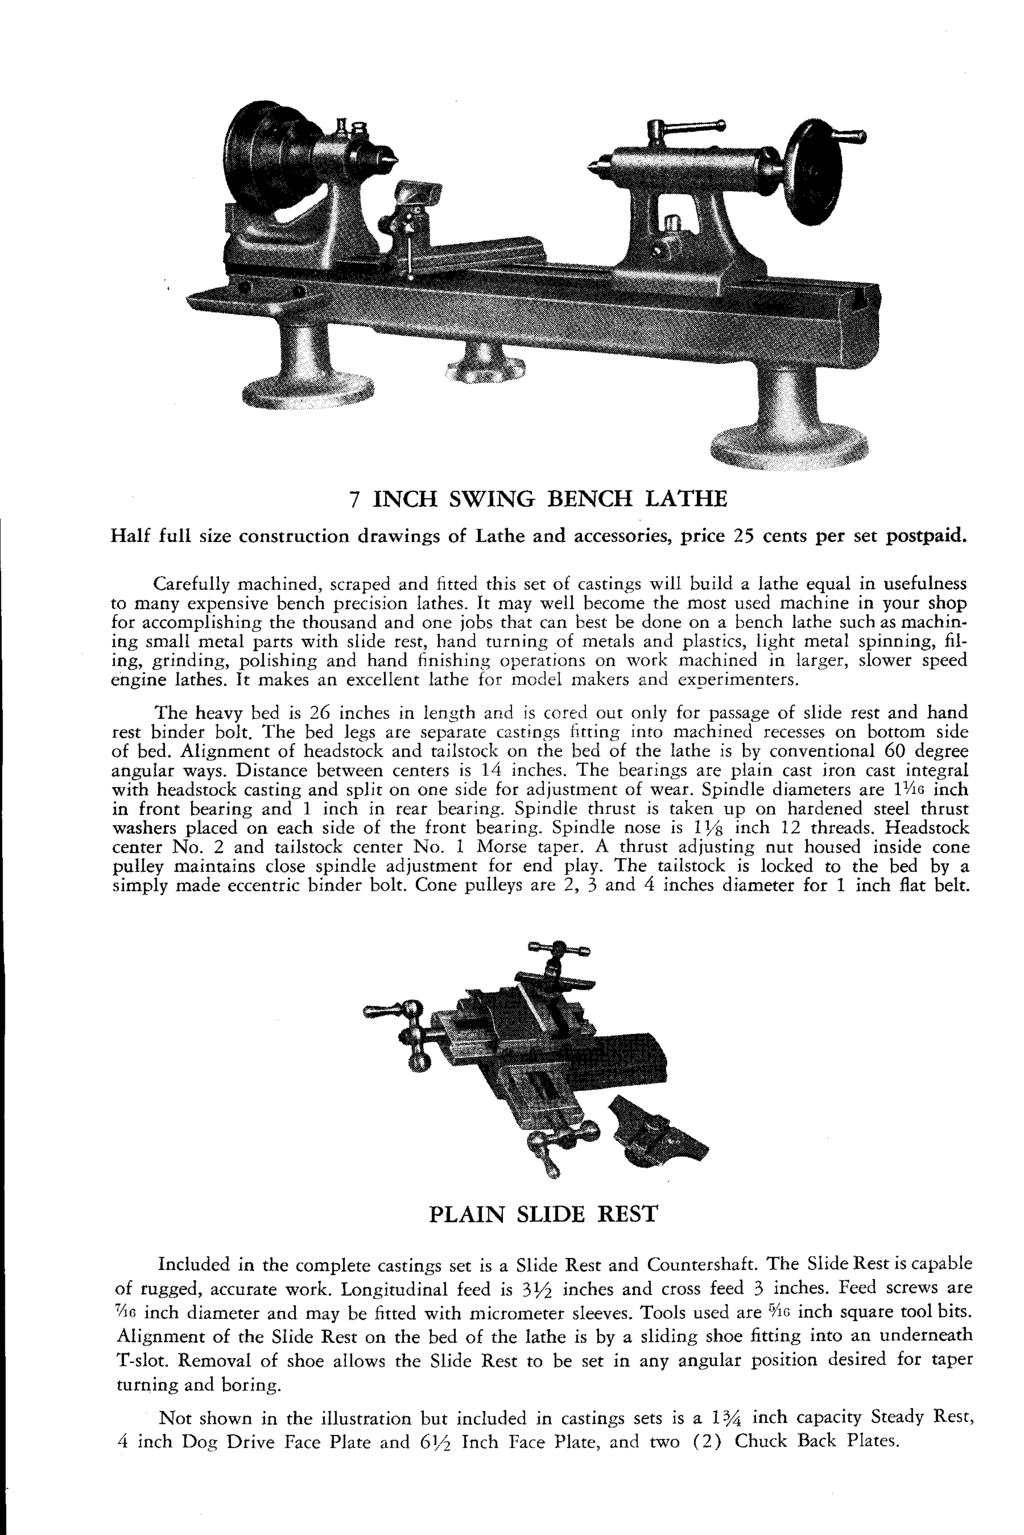 7 INCH SWING BENCH LATHE Half full size construction drawings of Lathe and accessories, price 25 cents per set postpaid.